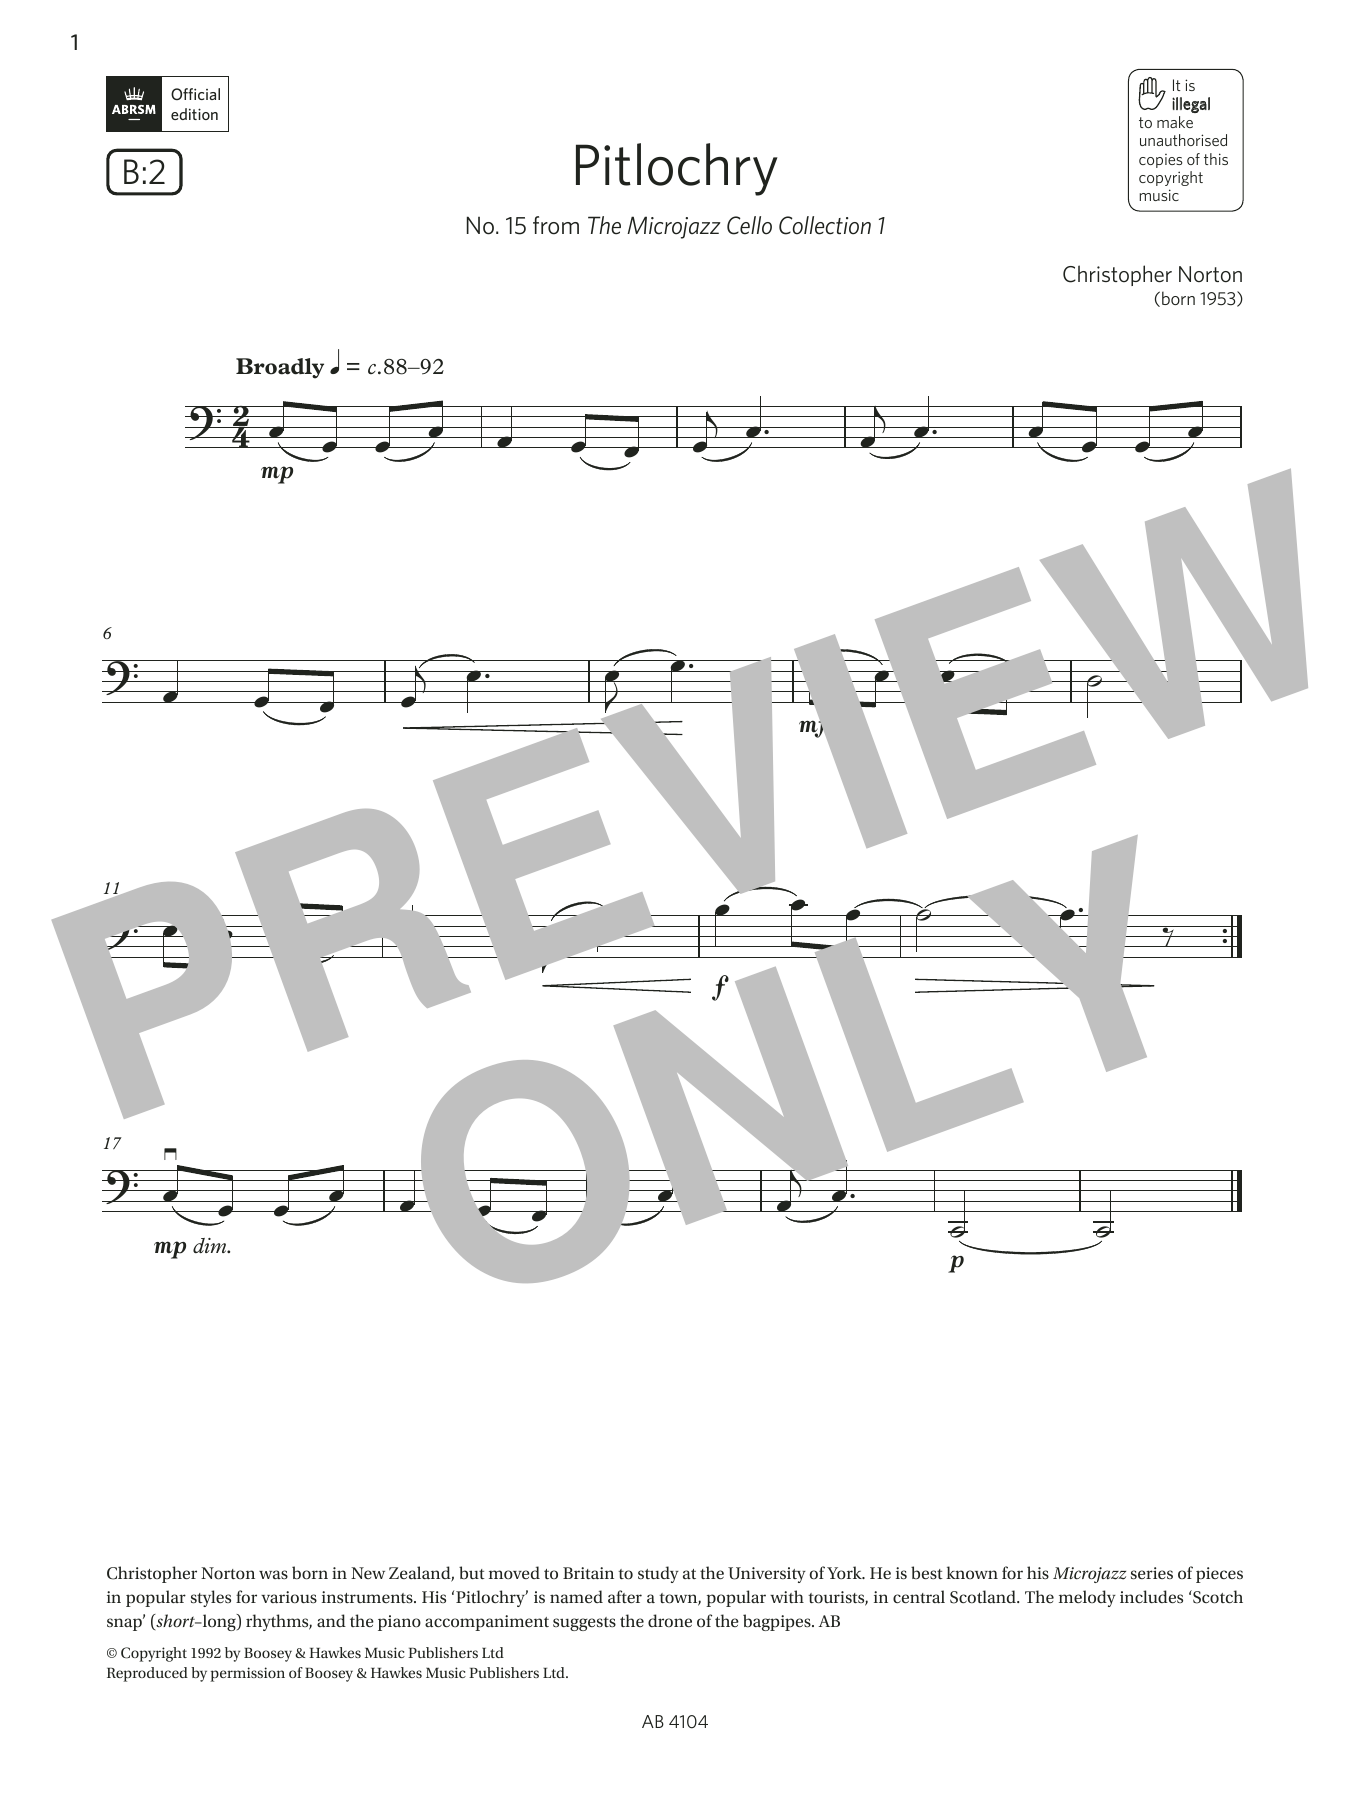 Download Christopher Norton Pitlochry (Grade 1, B2, from the ABRSM Sheet Music